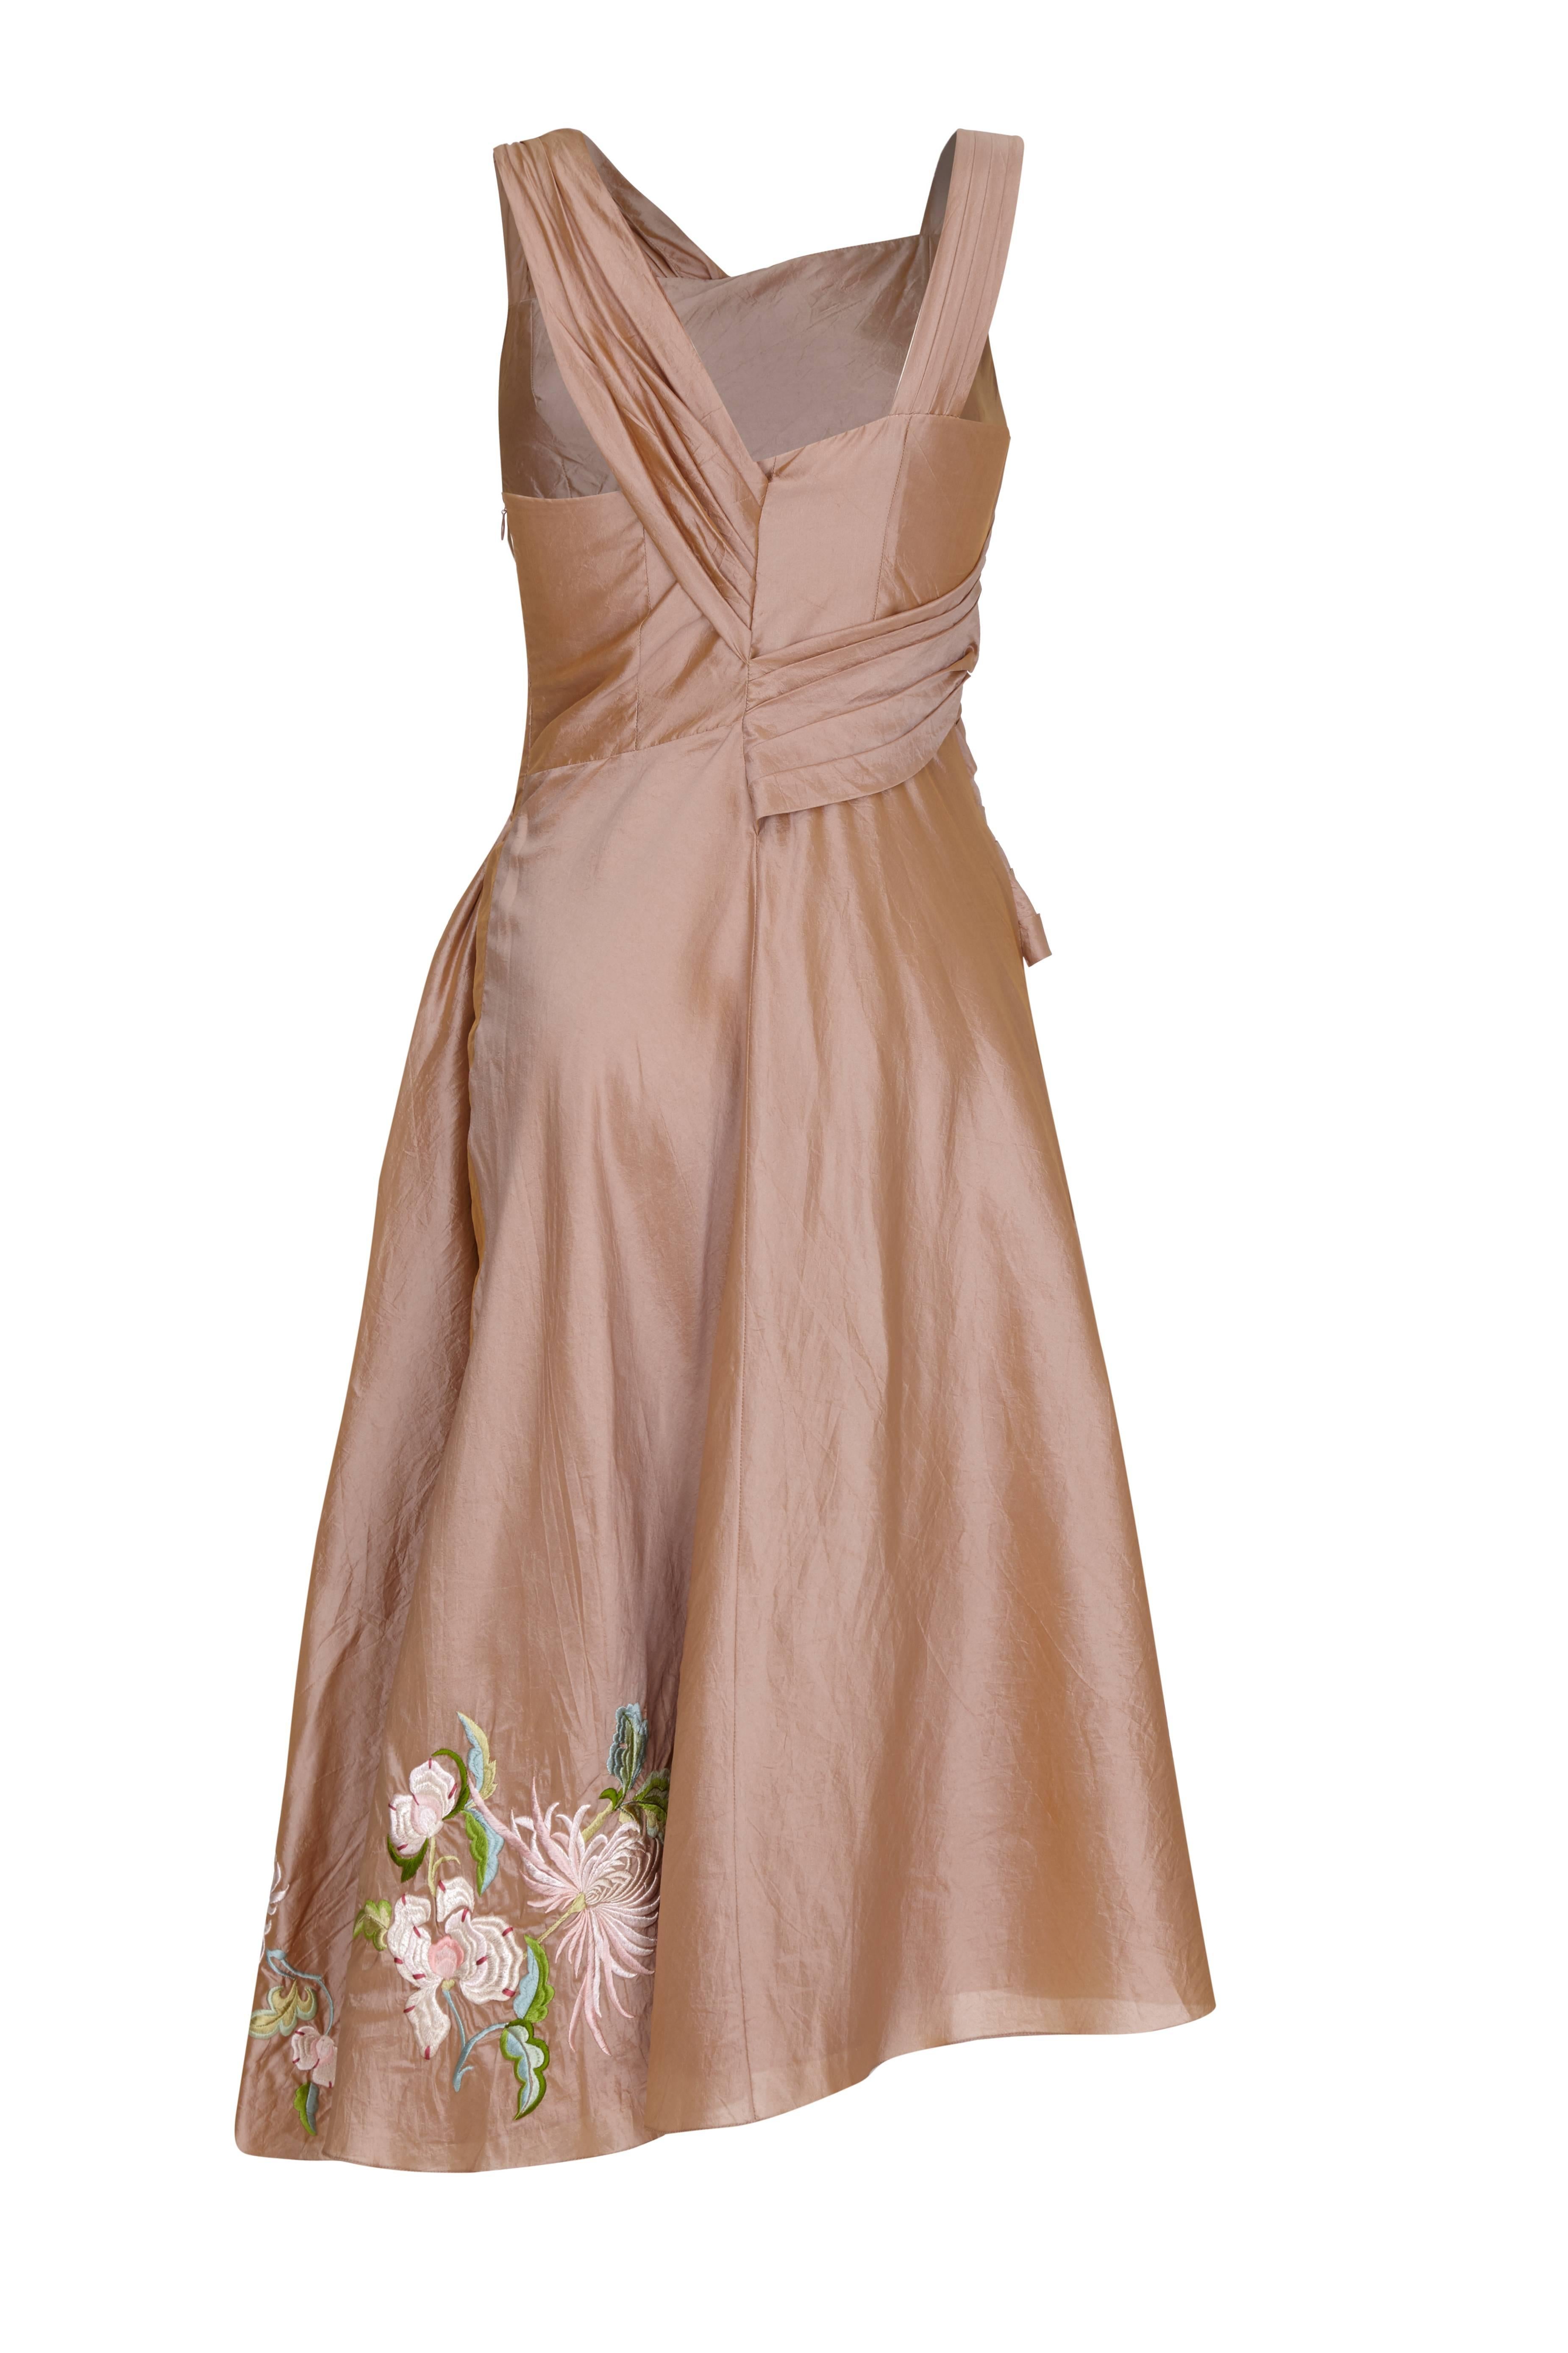 Beautiful 1997 floral embroidered, metallic champagne silk dress by John Galliano for Christian Dior.  This asymmetrical piece features a full skirt, pleated sash detail and fastens at the side with a zip. Inside it is lined in the same champagne